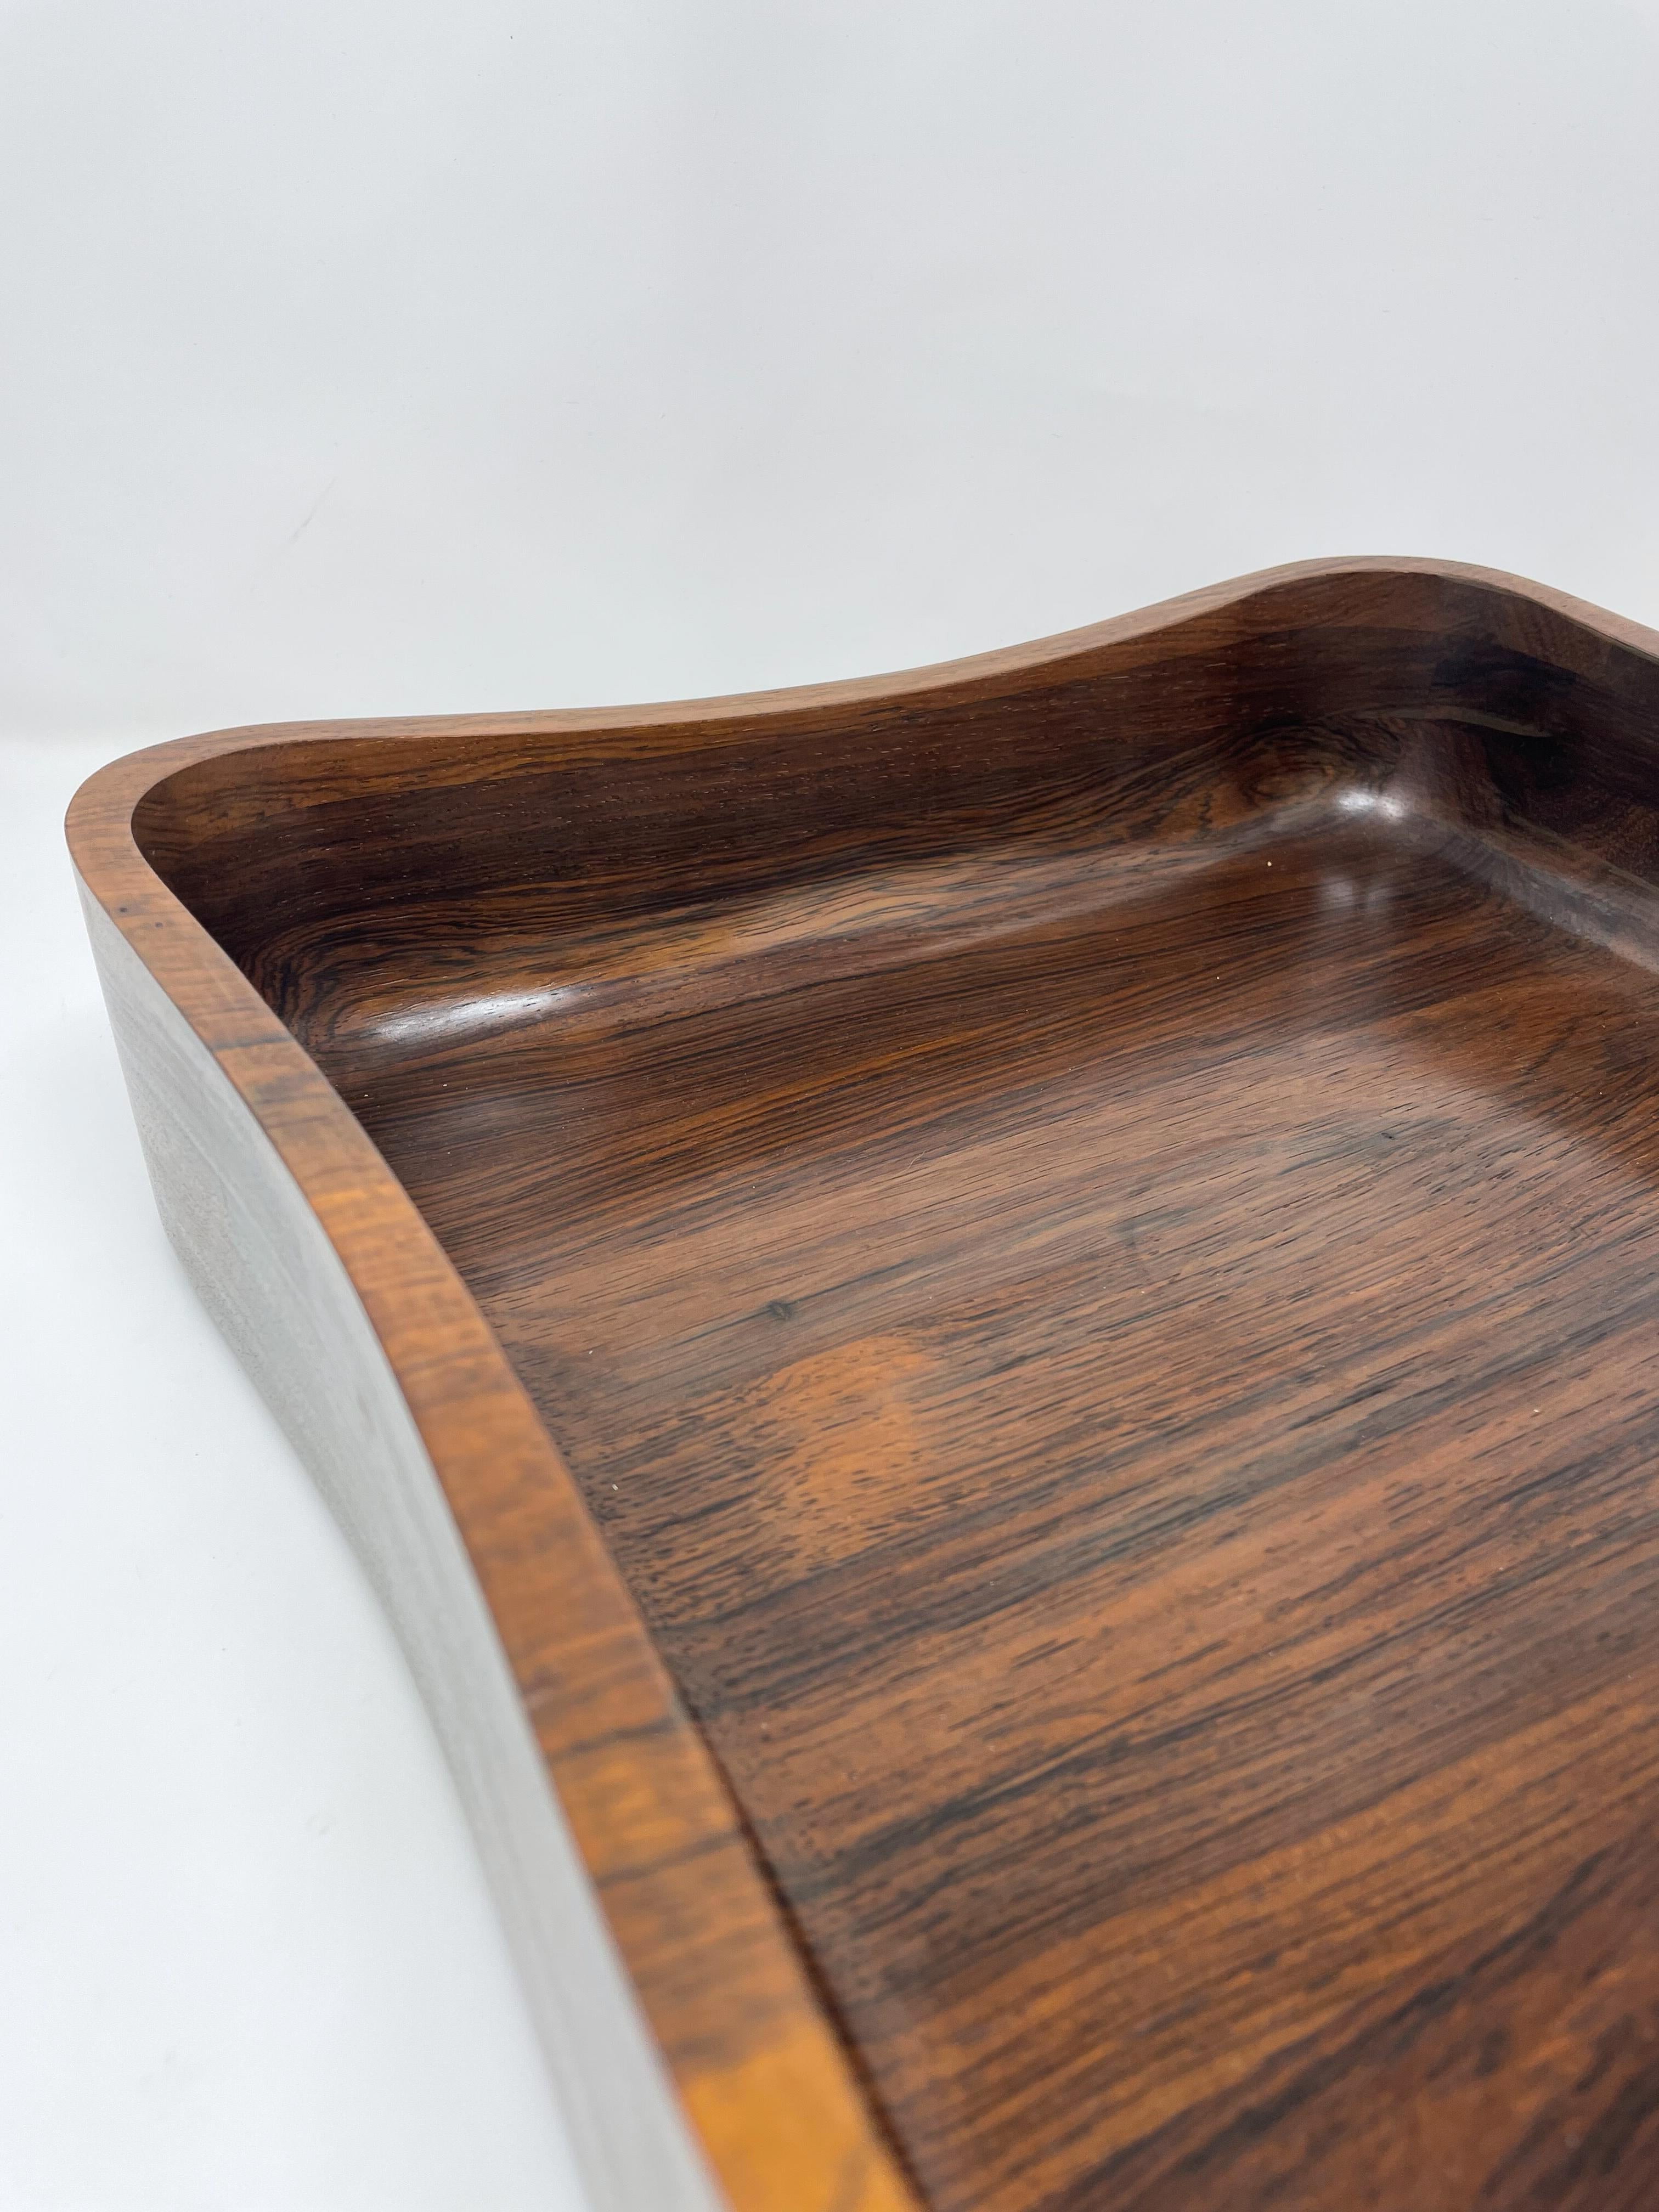 Mid-Century Modern Wooden Tray, Brazil, 1960s For Sale 2